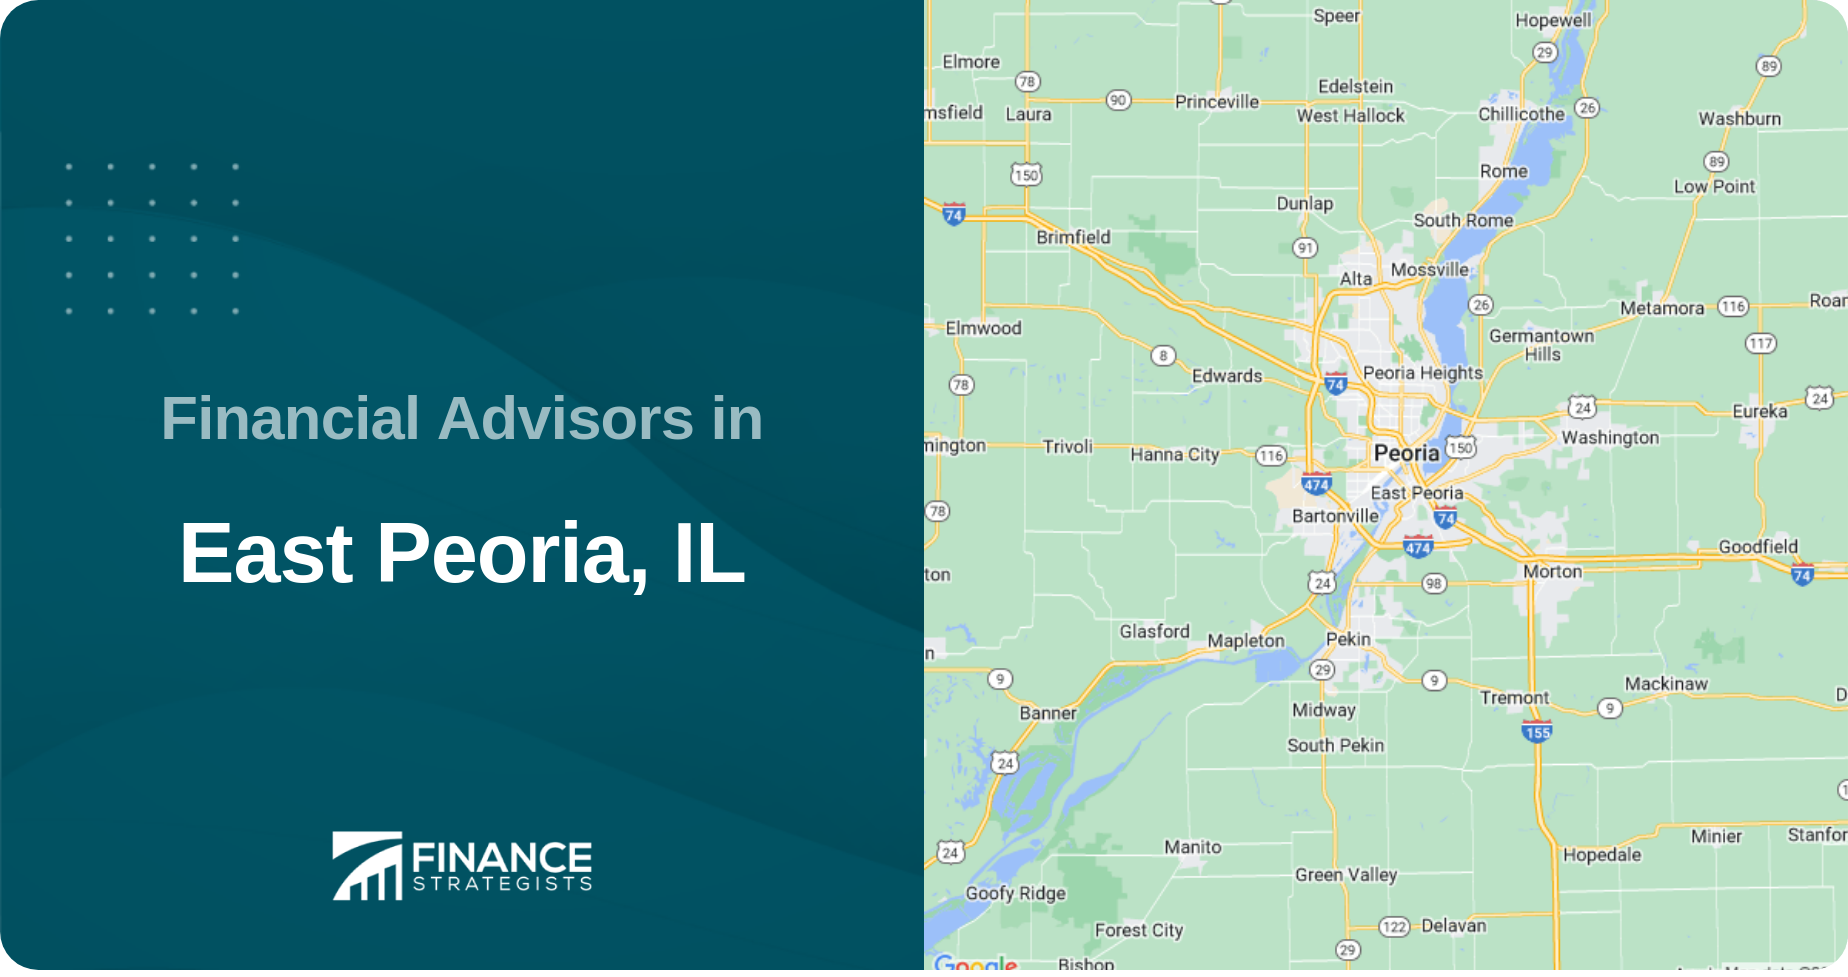 Financial Advisors in East Peoria, IL